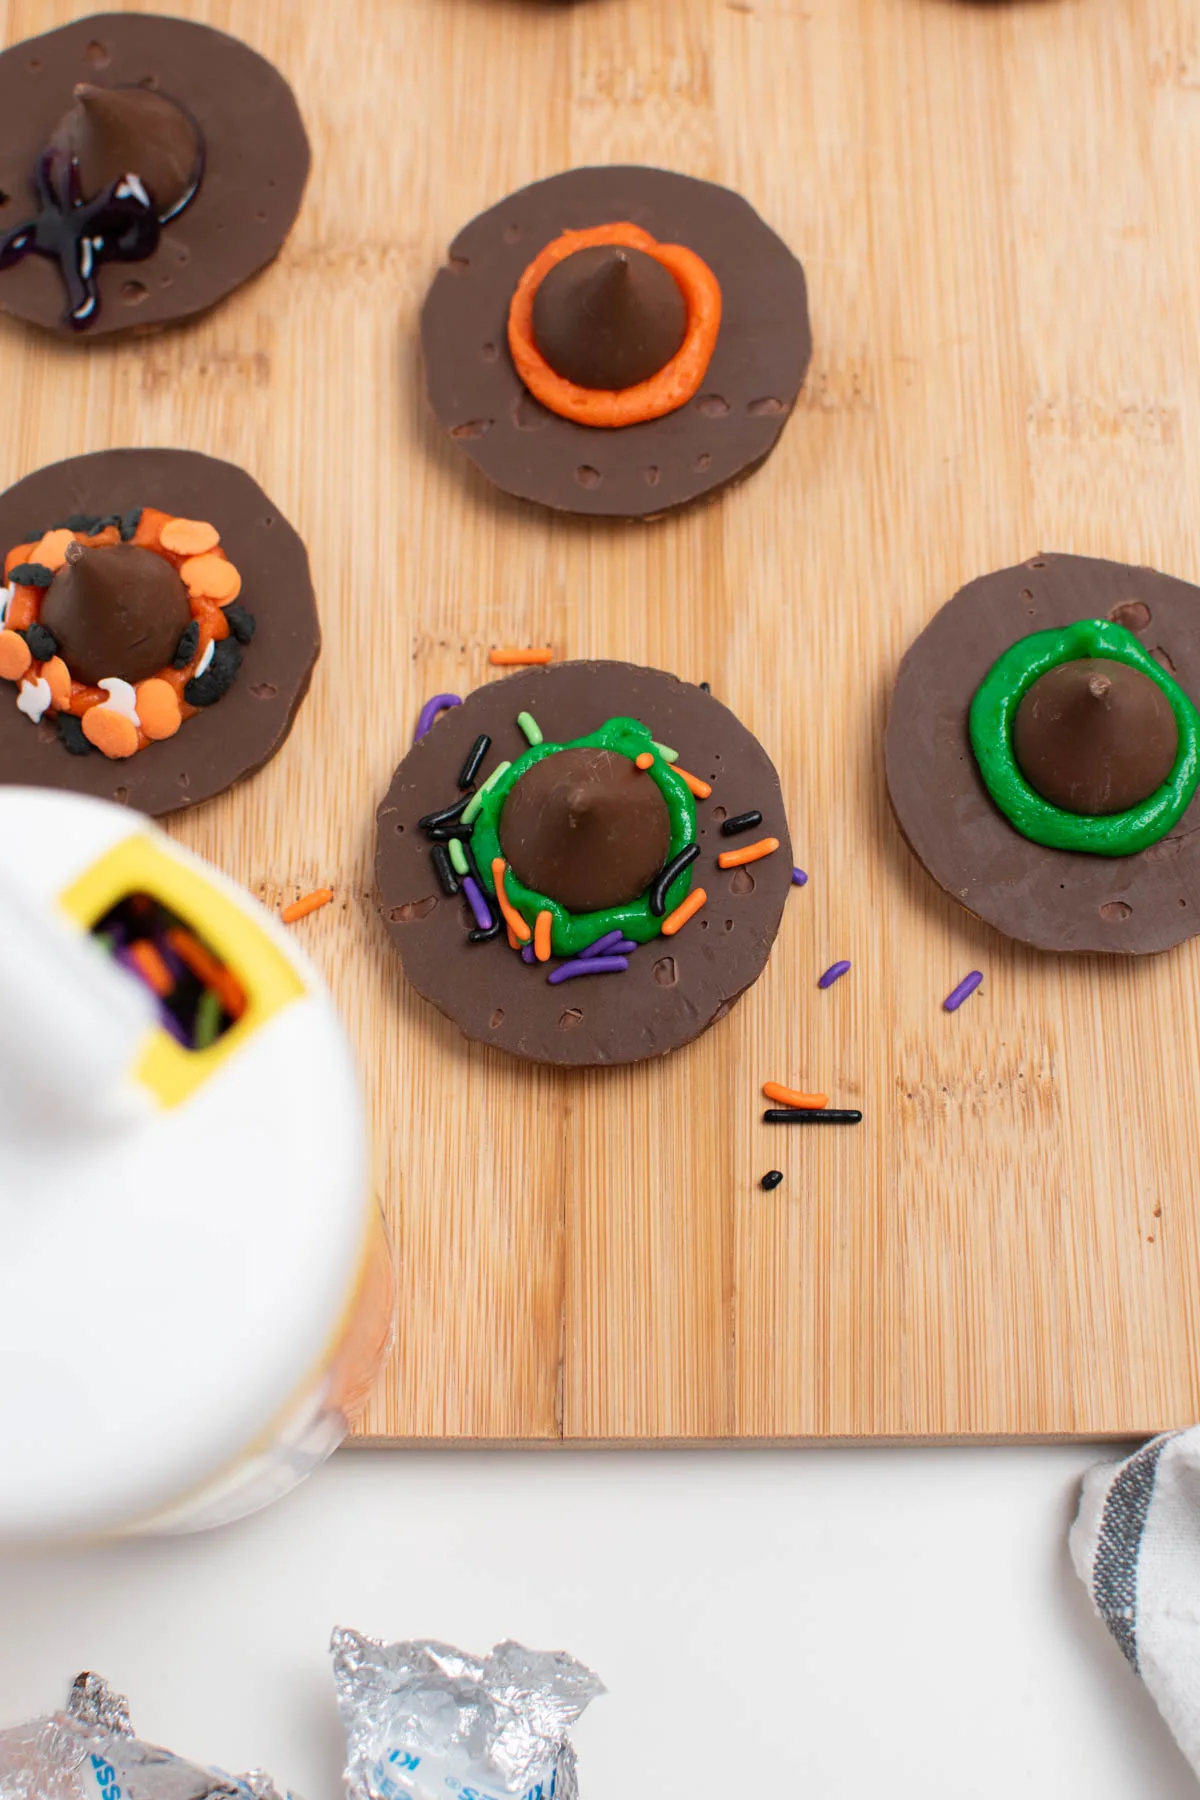 Halloween sprinkles on witch hat cookie and wood cutting board.